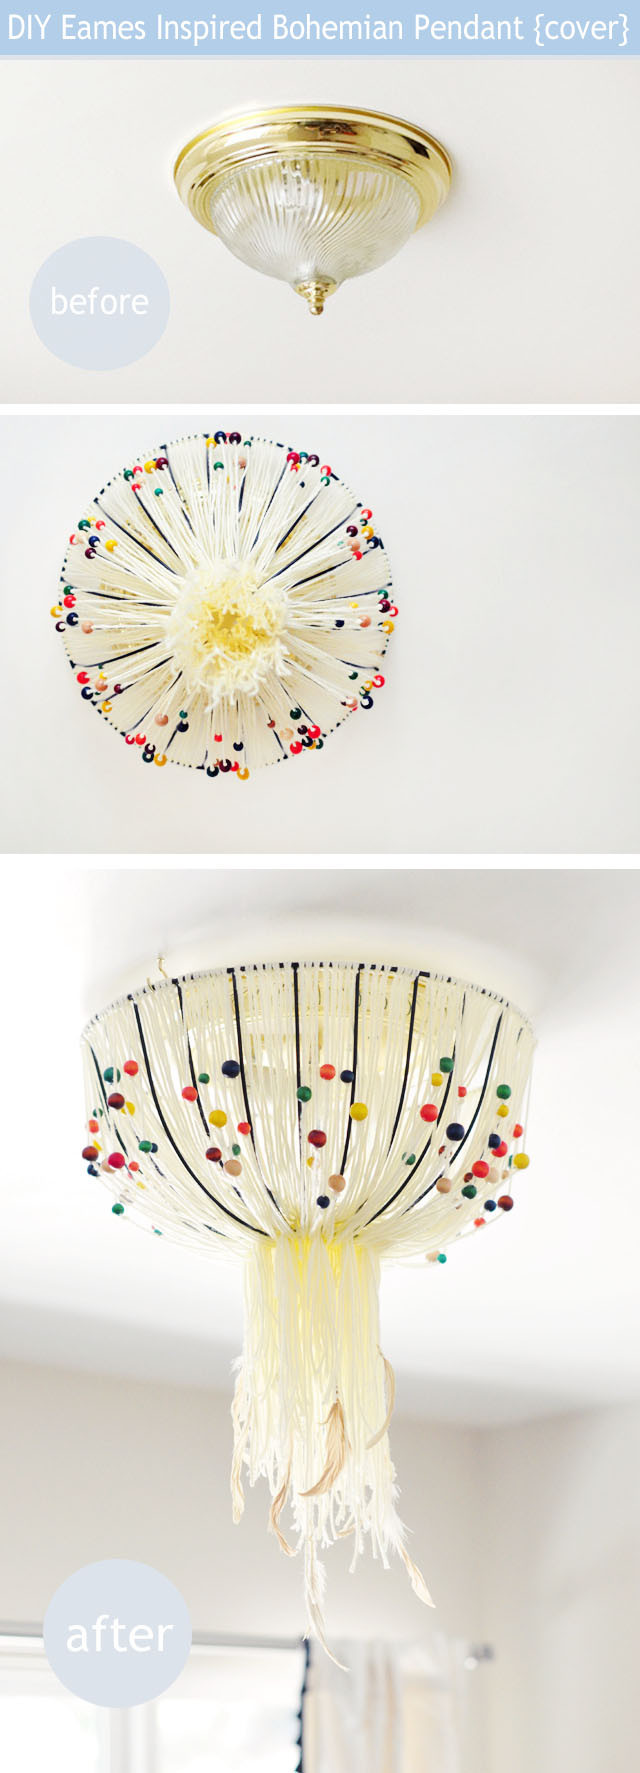 DIY Ceiling Light Cover
 DIY Eames Inspired Bohemian Pendant Lamp Cover w out